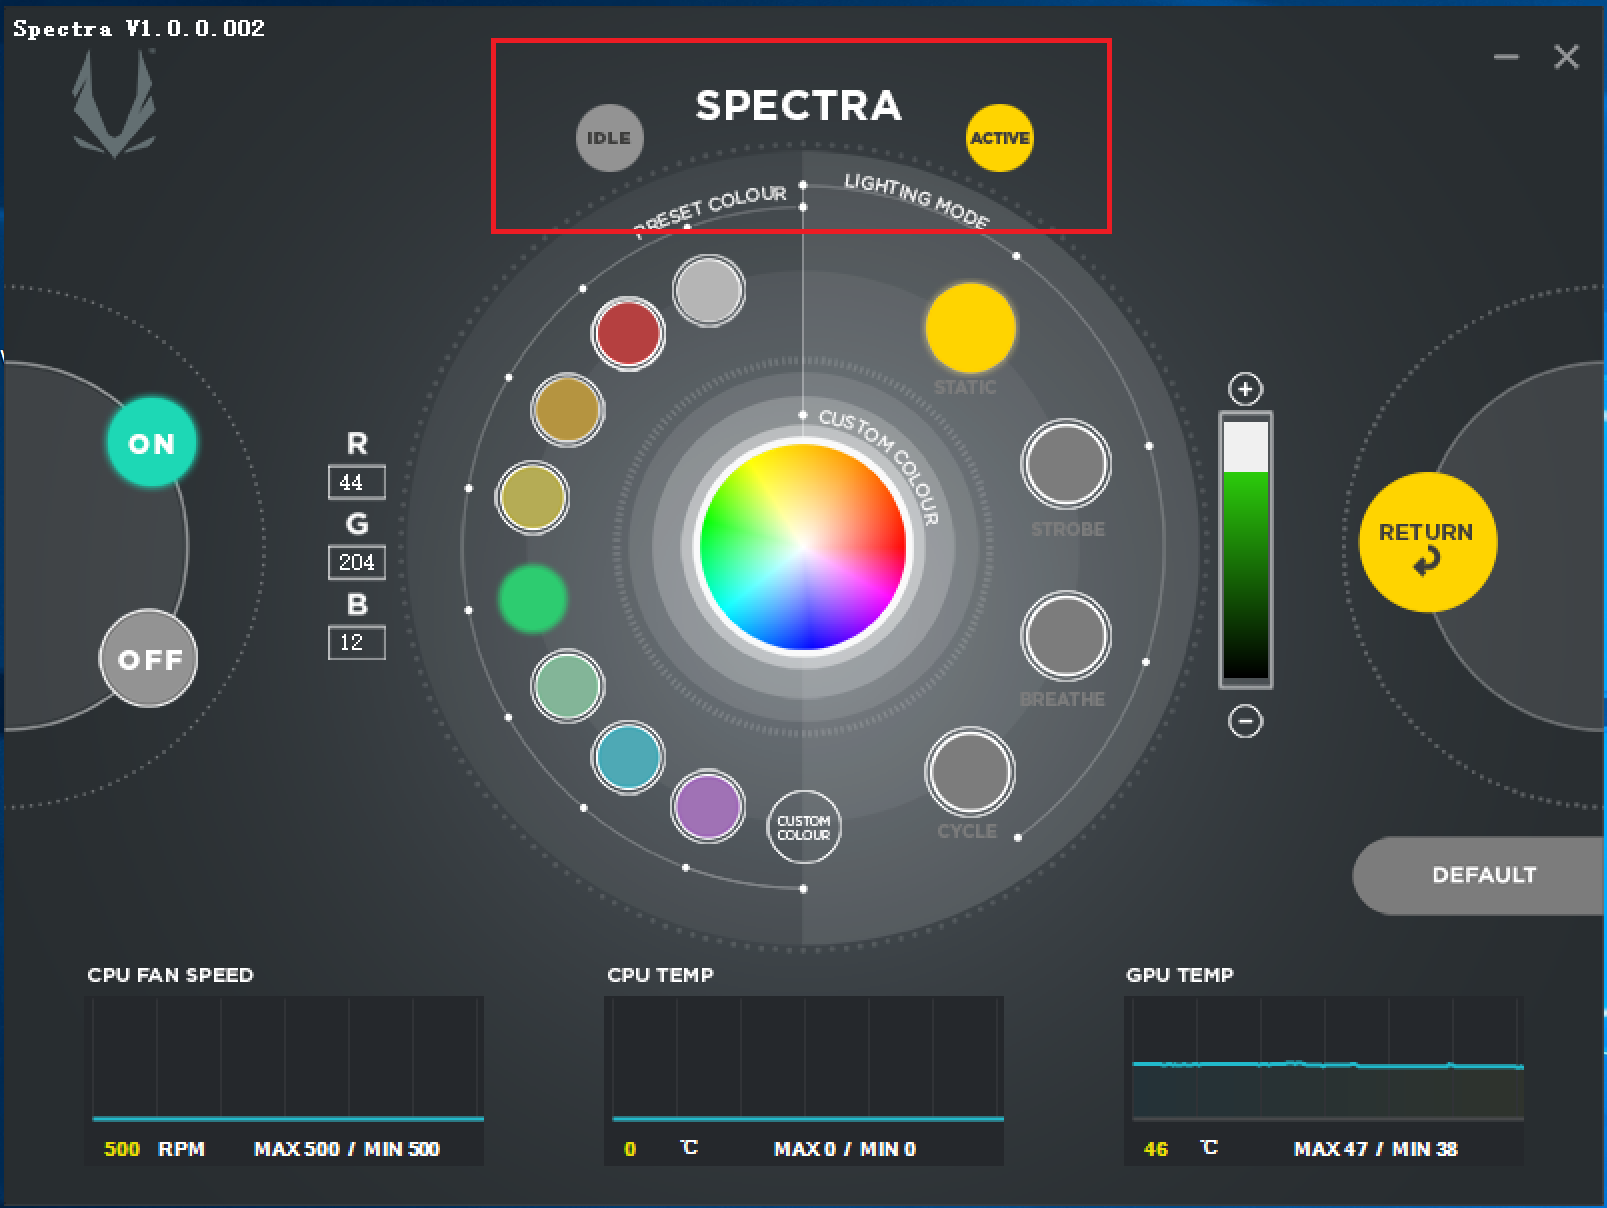 How to use the ZOTAC GAMING SPECTRA Utility | ZOTAC